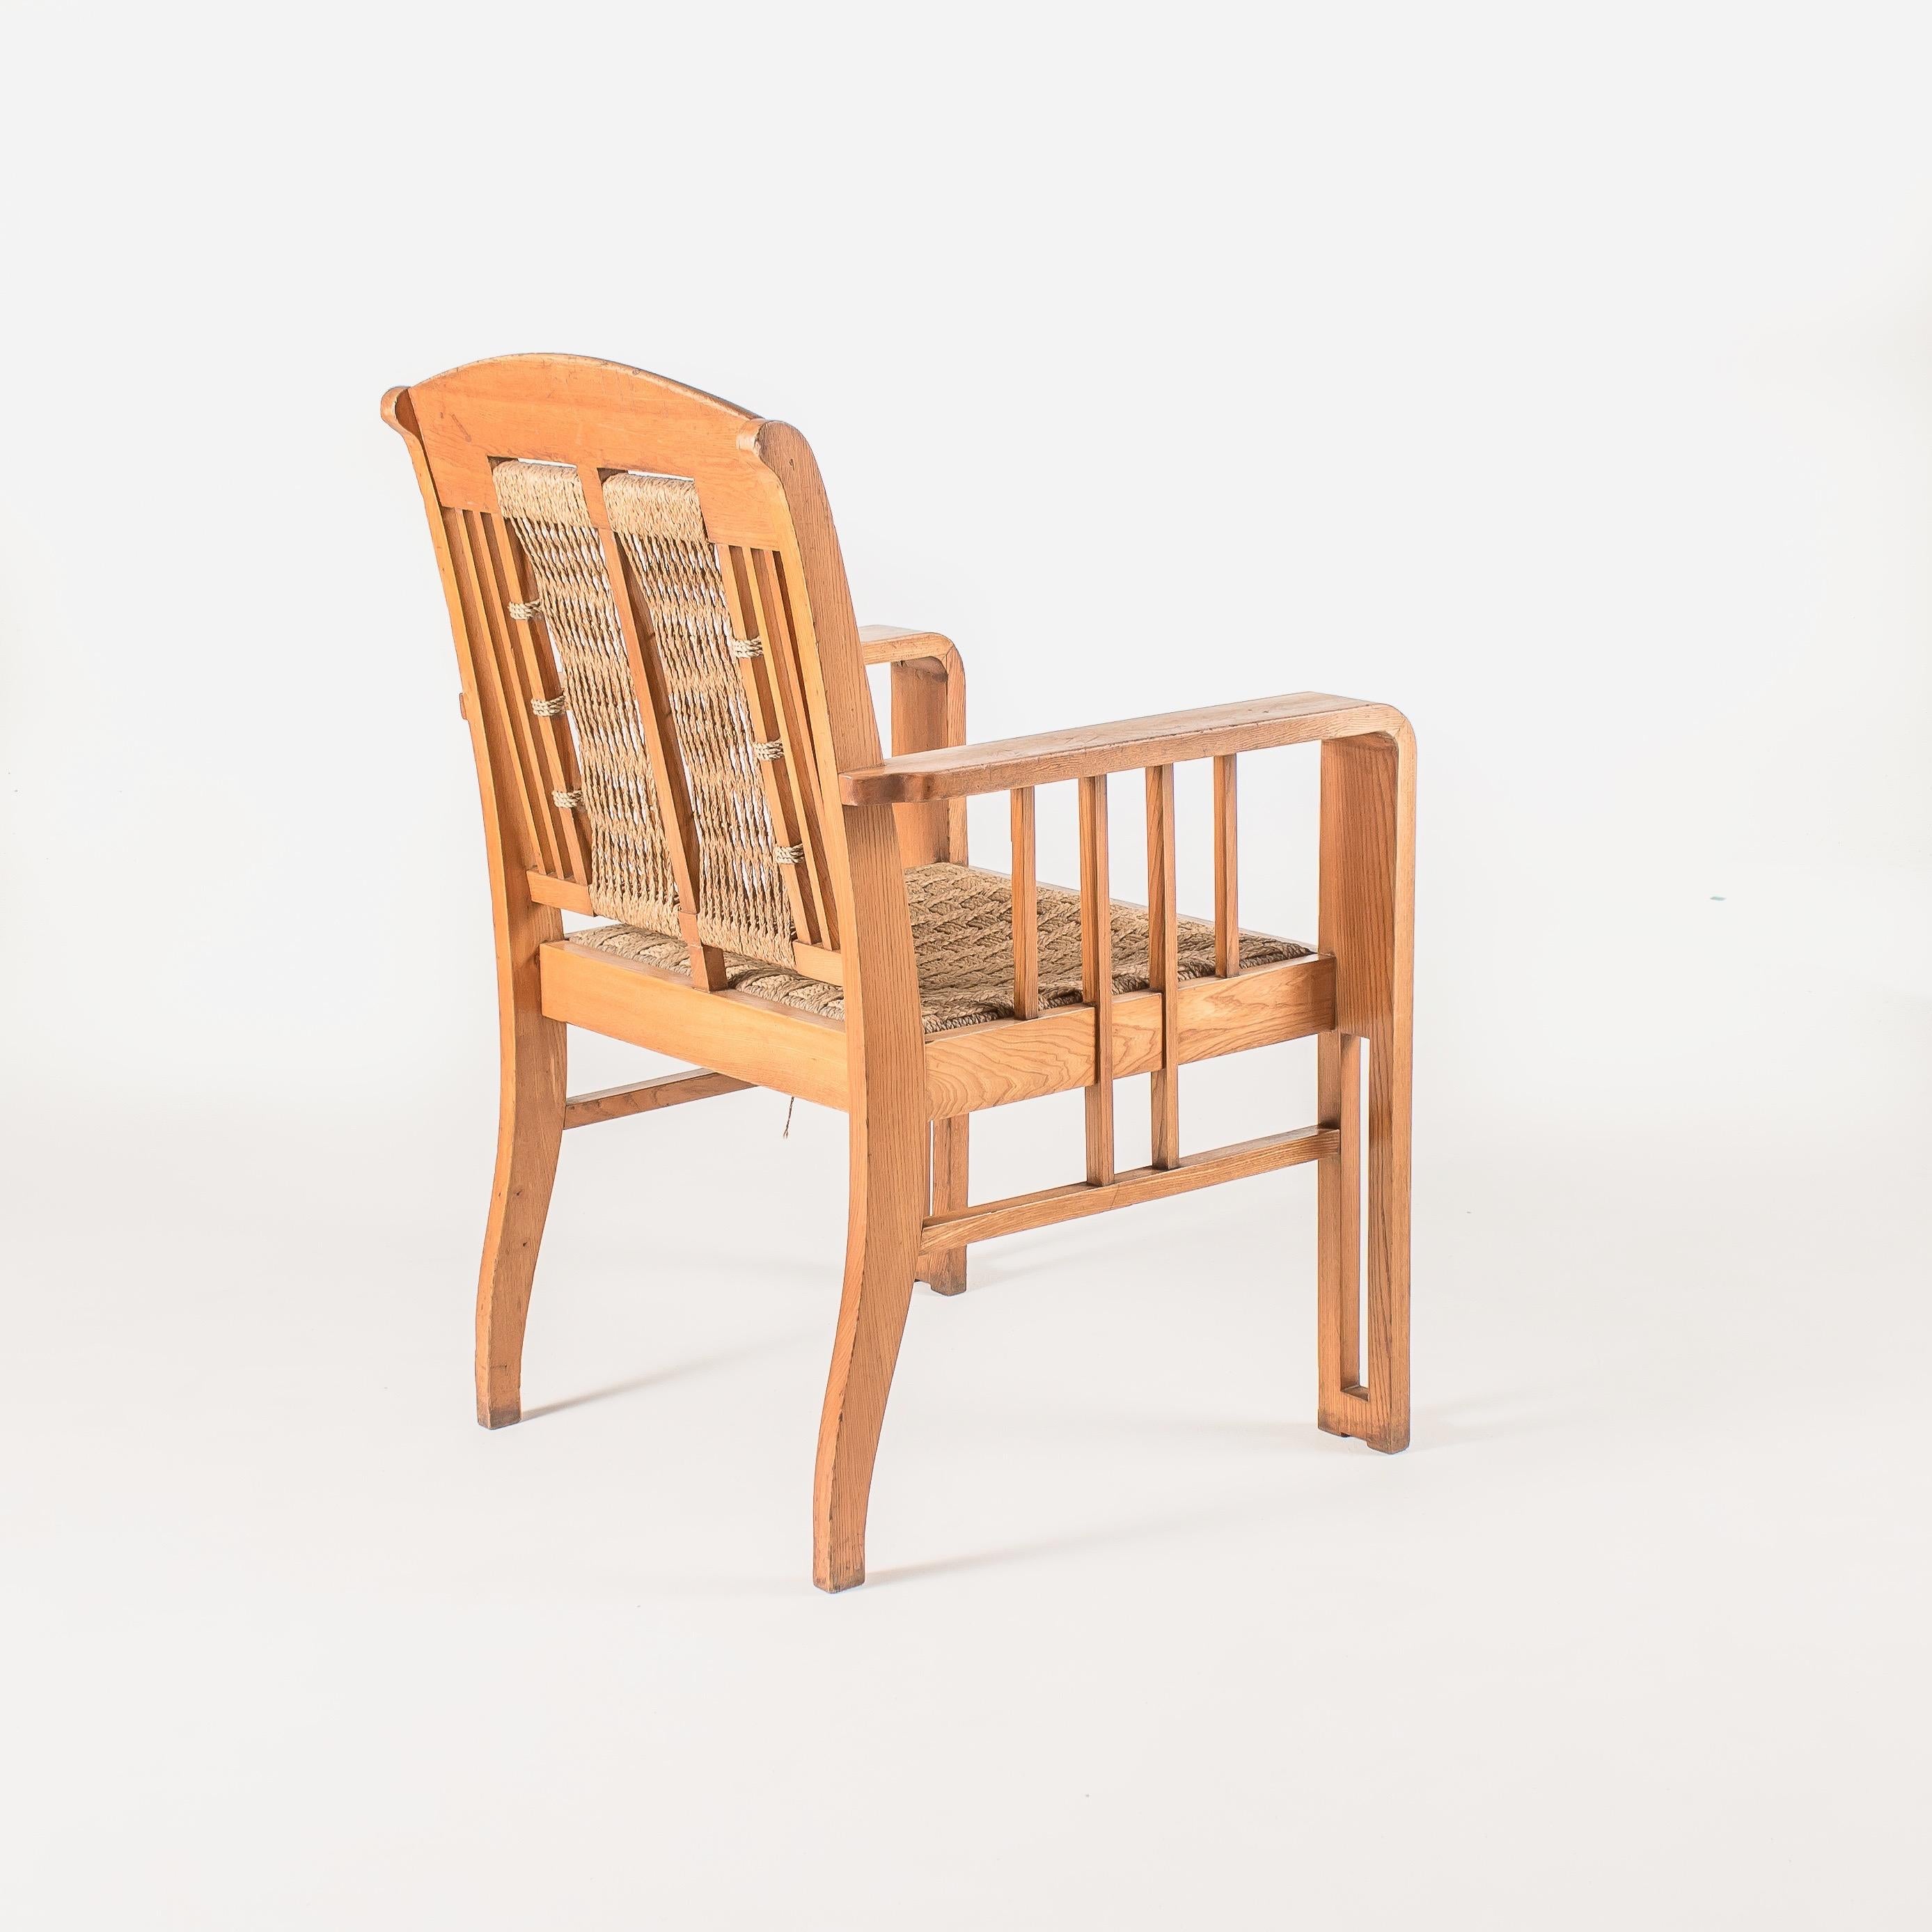 Early 20th Century Pair of Art Nouveau Ash and Seagrass Armchairs